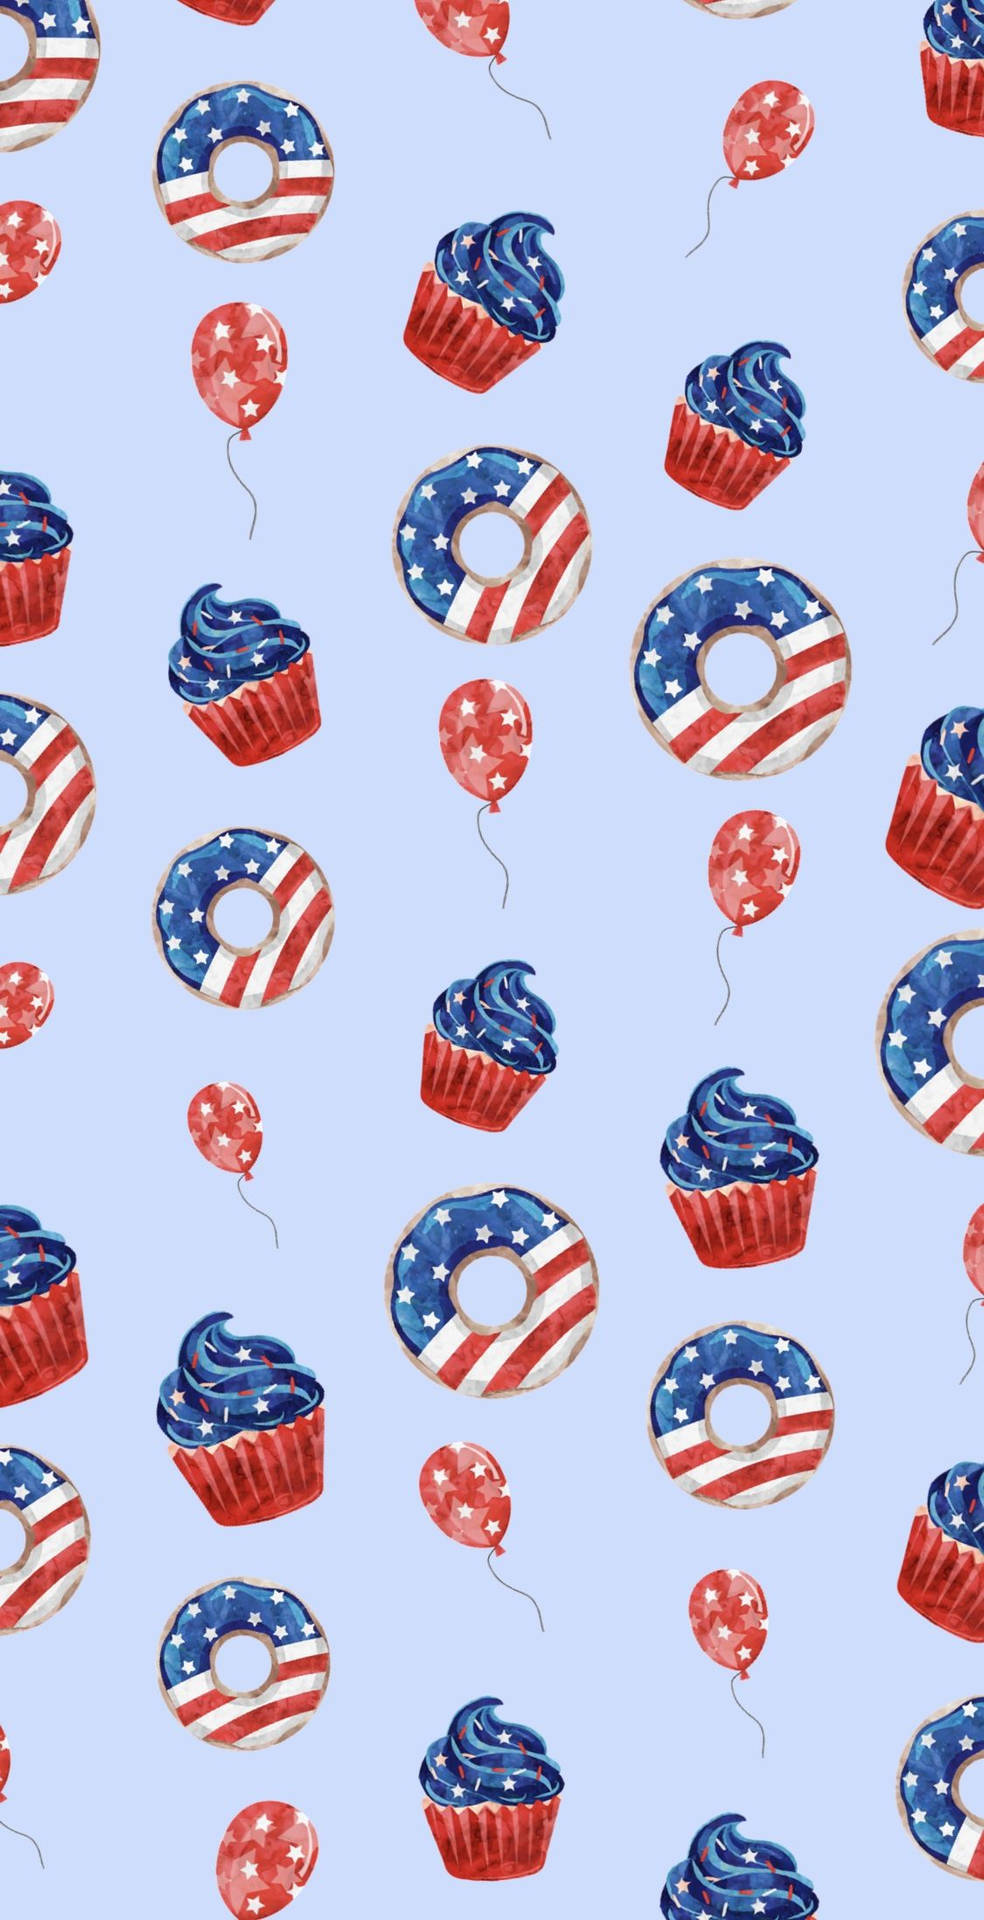 “Celebrating Independence Day among friends and family” Wallpaper